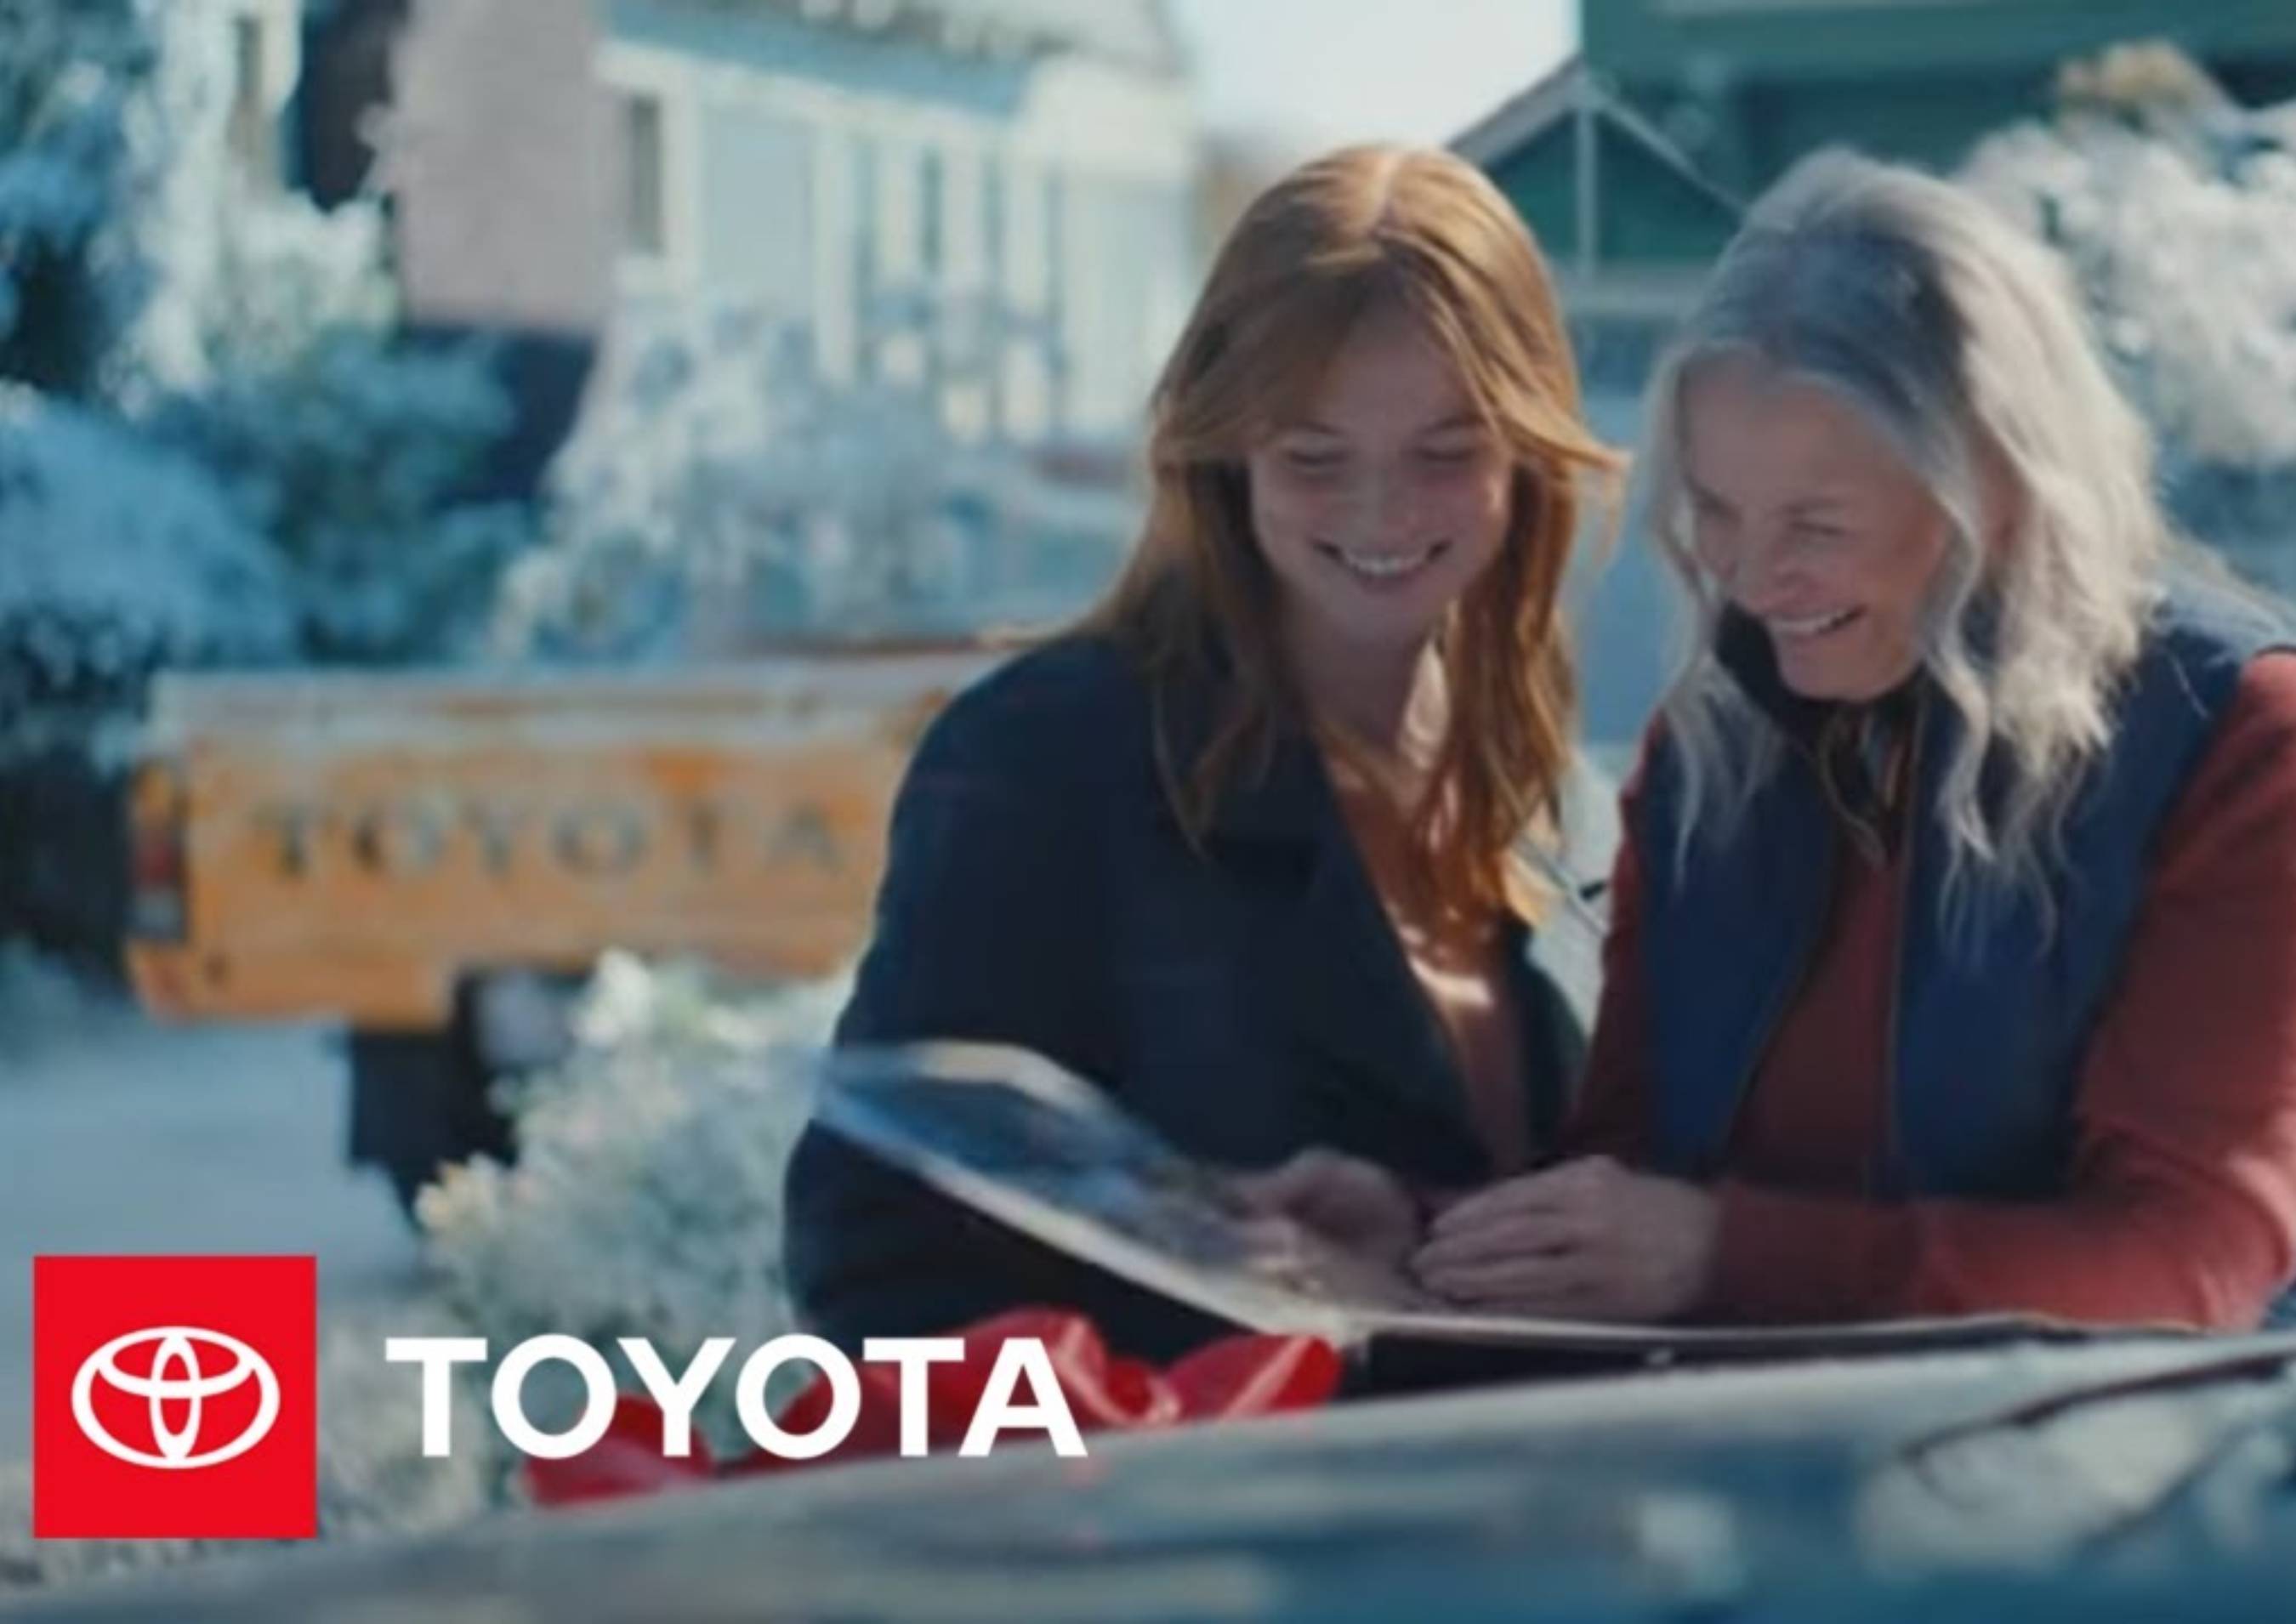 Toyota is celebrating the joy in creating holiday memories with family in the new holiday spot, “Present from the Past,” created by Saatchi & Saatchi.